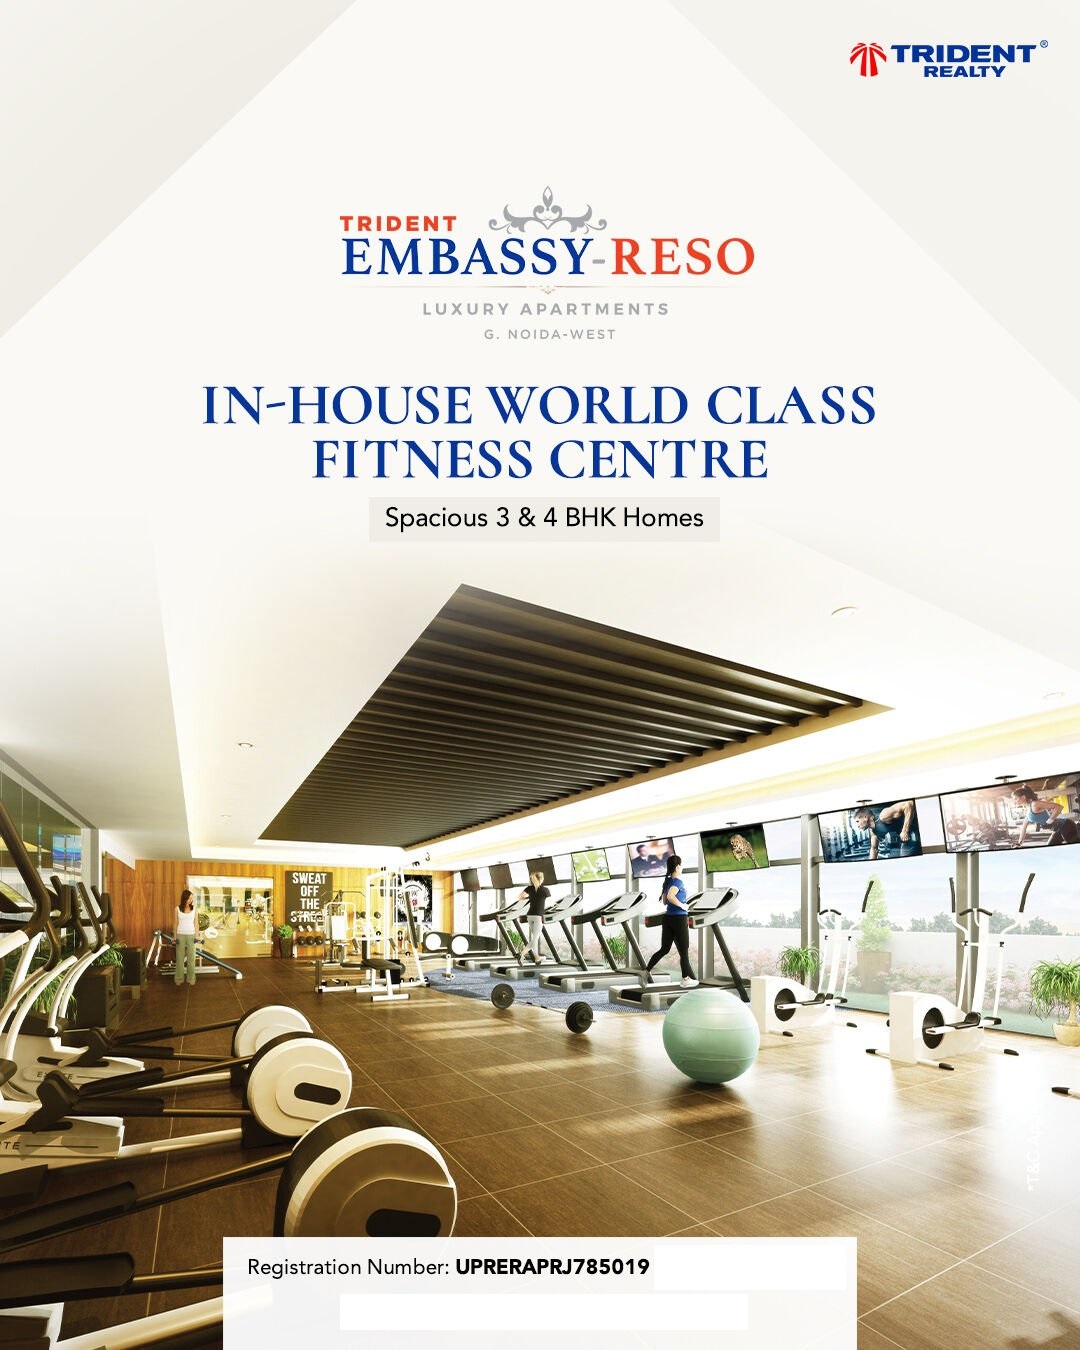 In house world class fitness centre at Trident Embassy Reso in Greater Noida